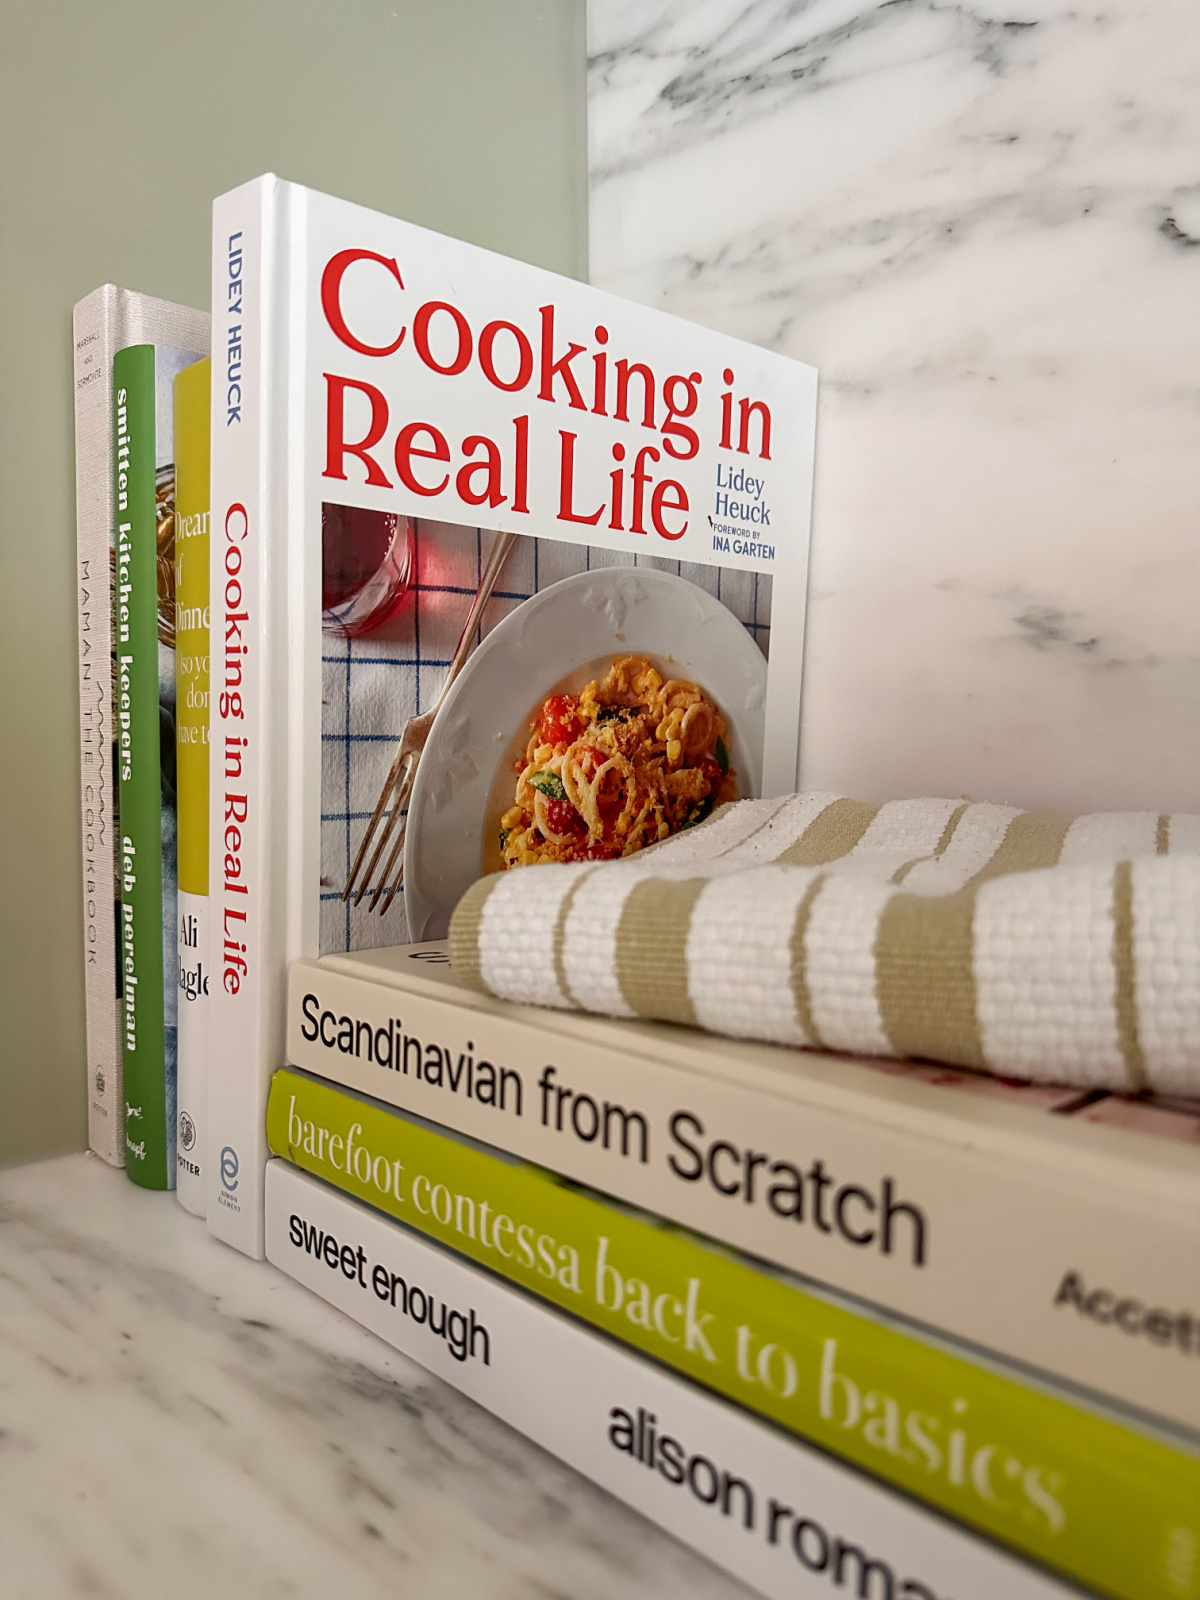 Cookbooks stacked vertically and horizontally on kitchen countertop.